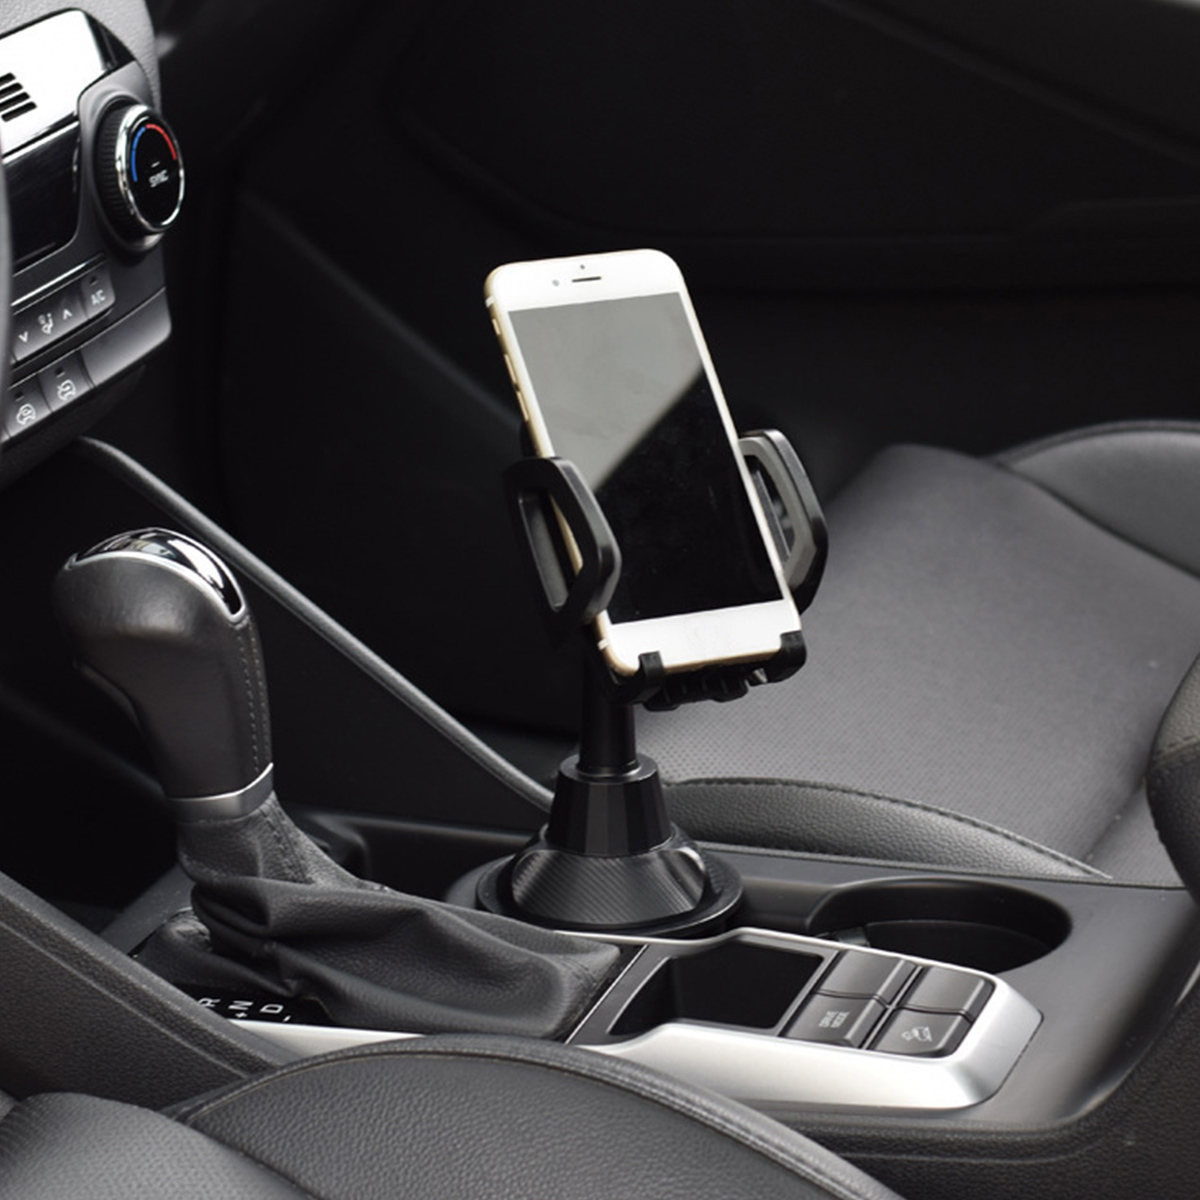 Universal-360-Rotation-Car-Phone-Mount-Gooseneck-Cup-Holder-for-5-95cm-Width-Cell-Phone-for-iPhone-1-1720314-8